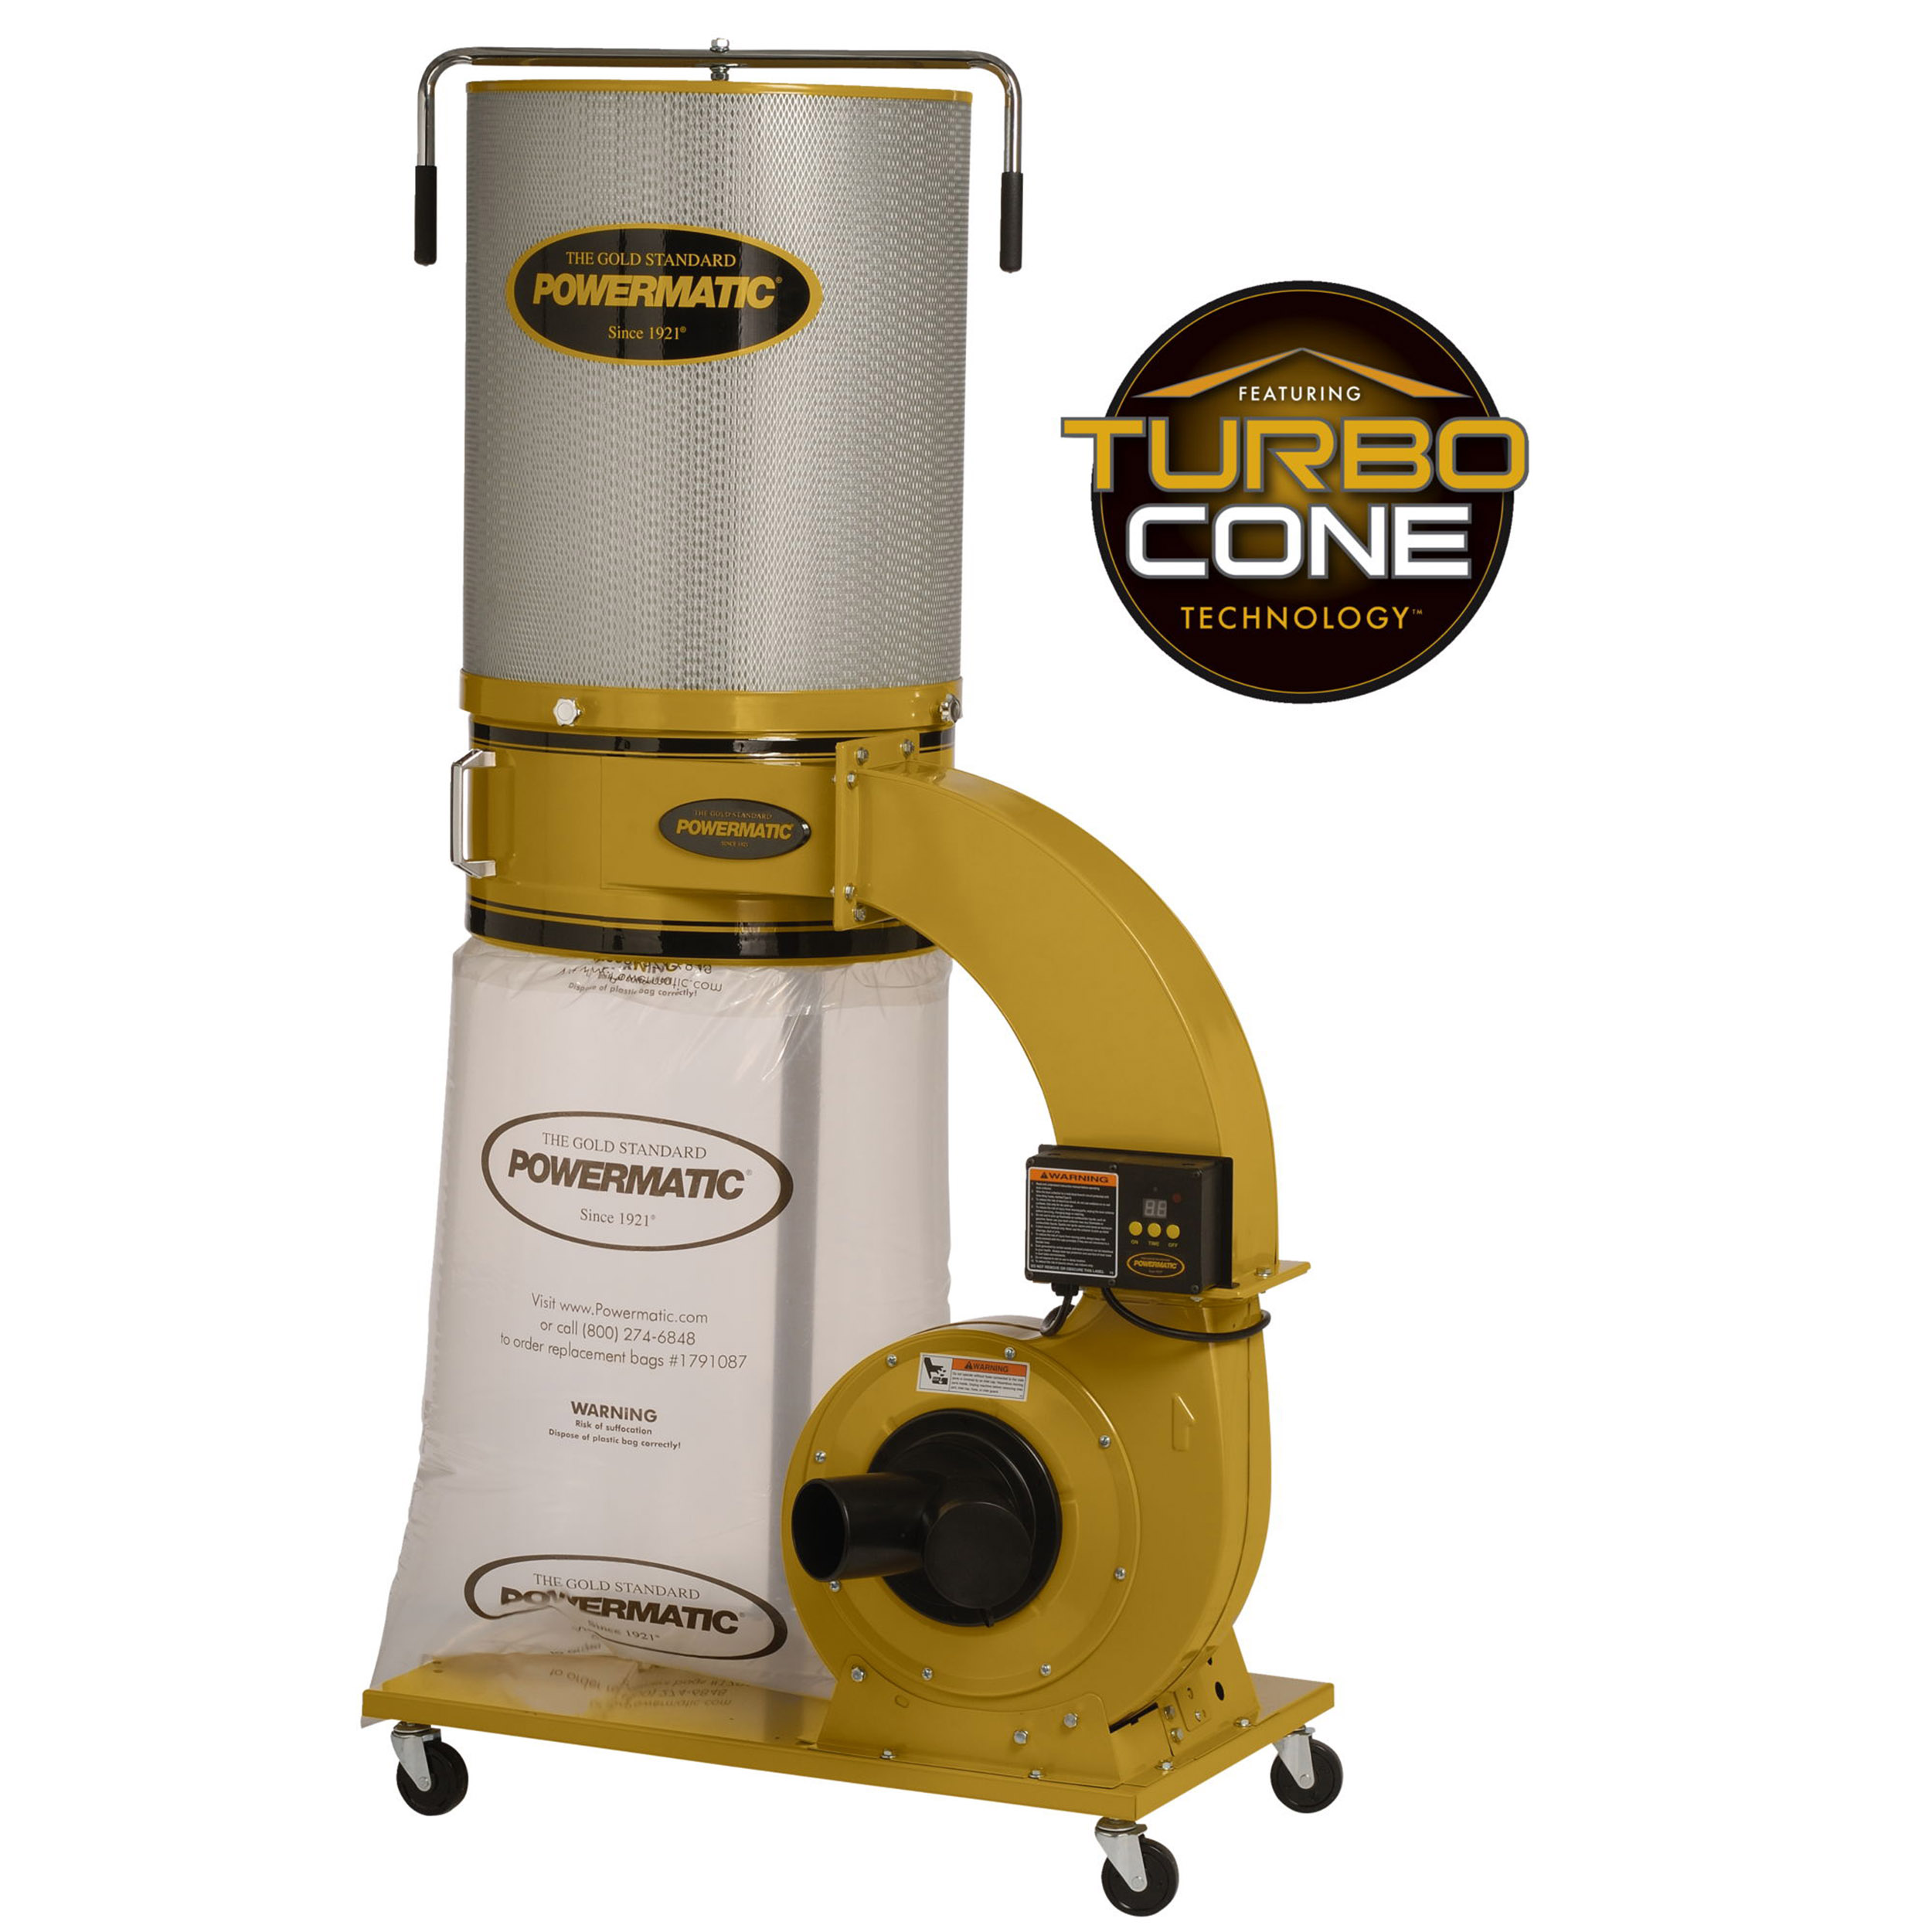 TurboCone Dust Collector, 1.75HP 1PH 115/230V, 2-Micron Canister Kit, Model PM1300TX-CK